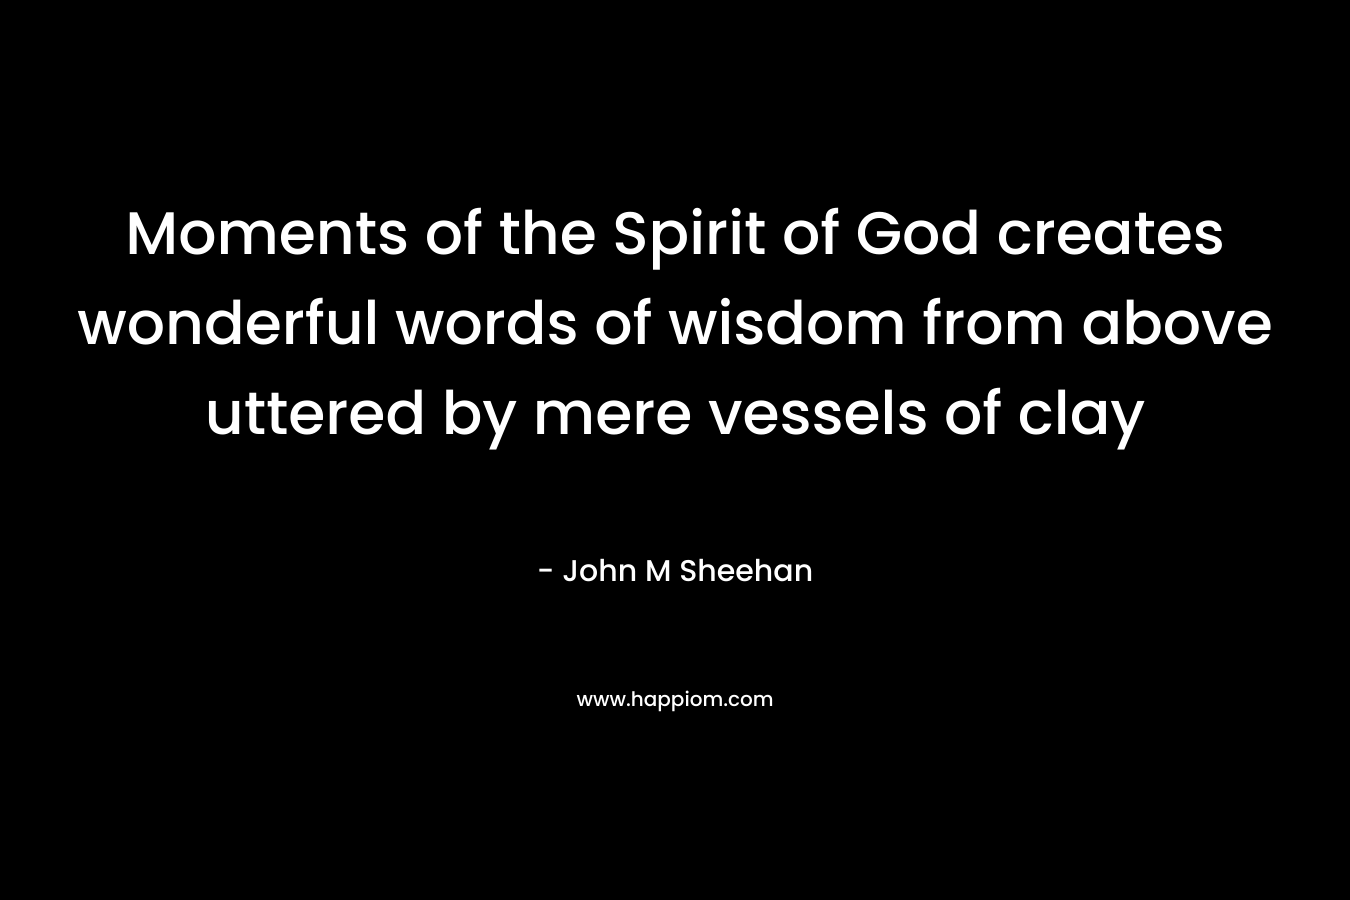 Moments of the Spirit of God creates wonderful words of wisdom from above uttered by mere vessels of clay – John M Sheehan